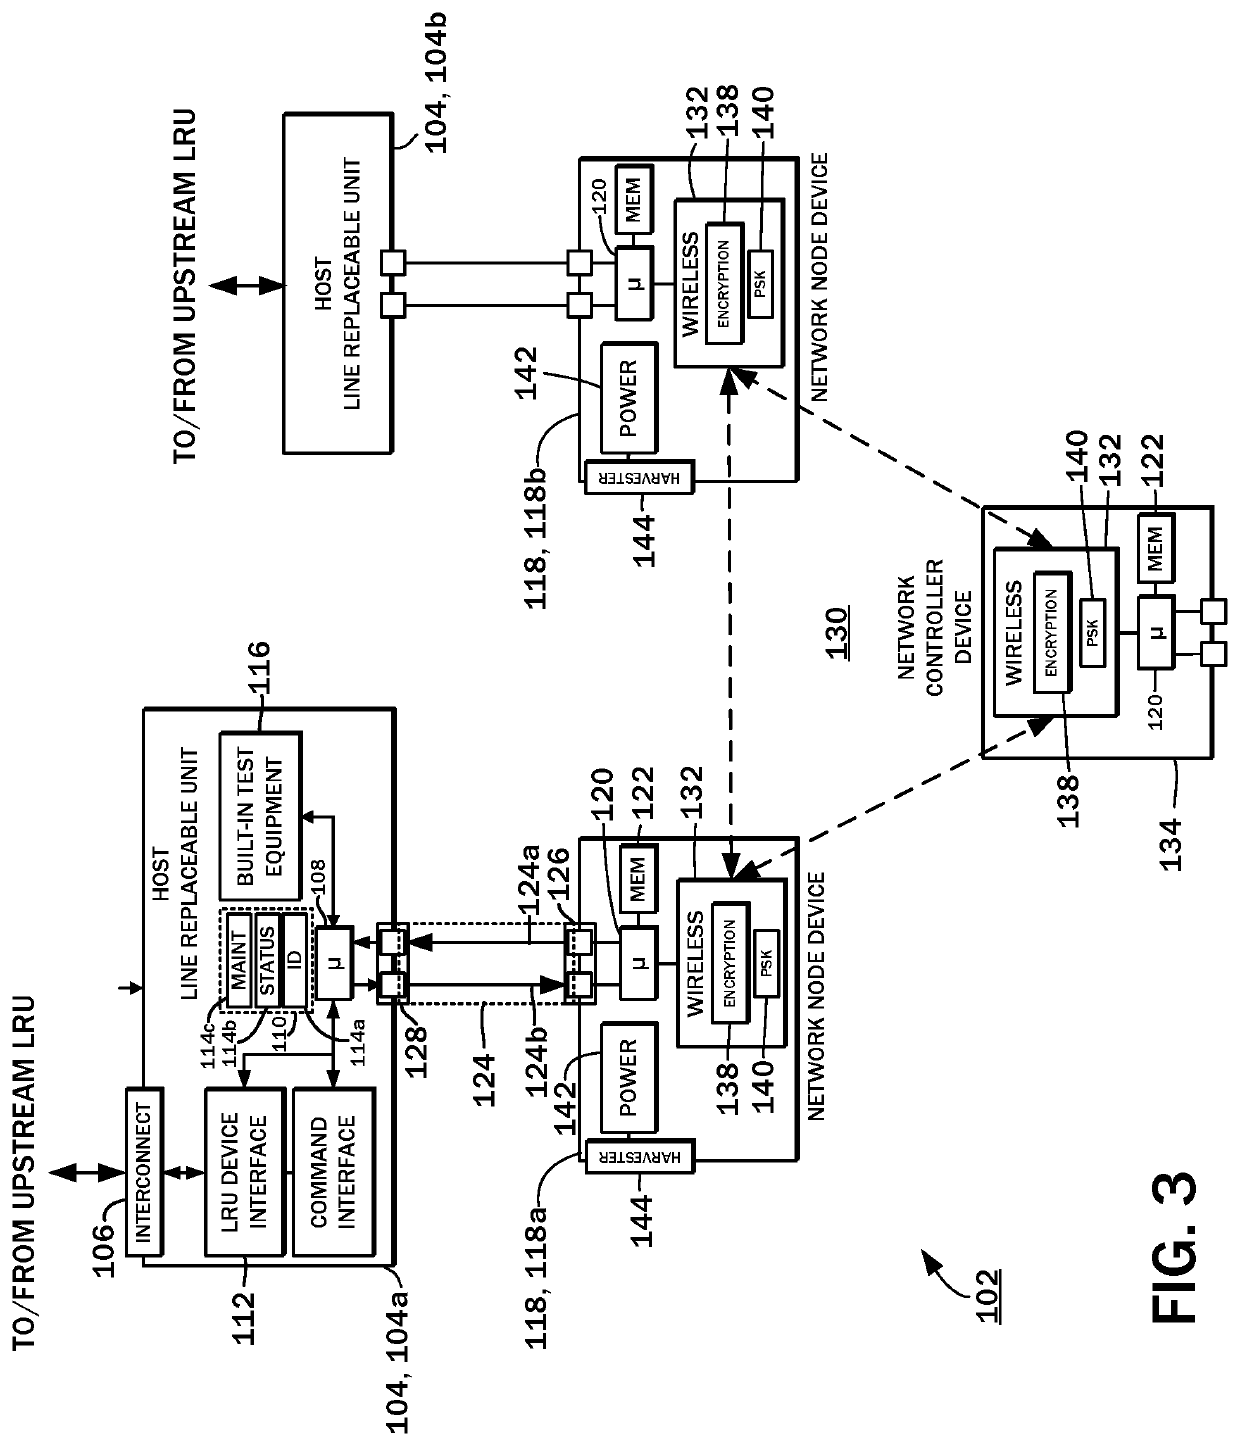 Vehicle auxiliary wireless personal area network system